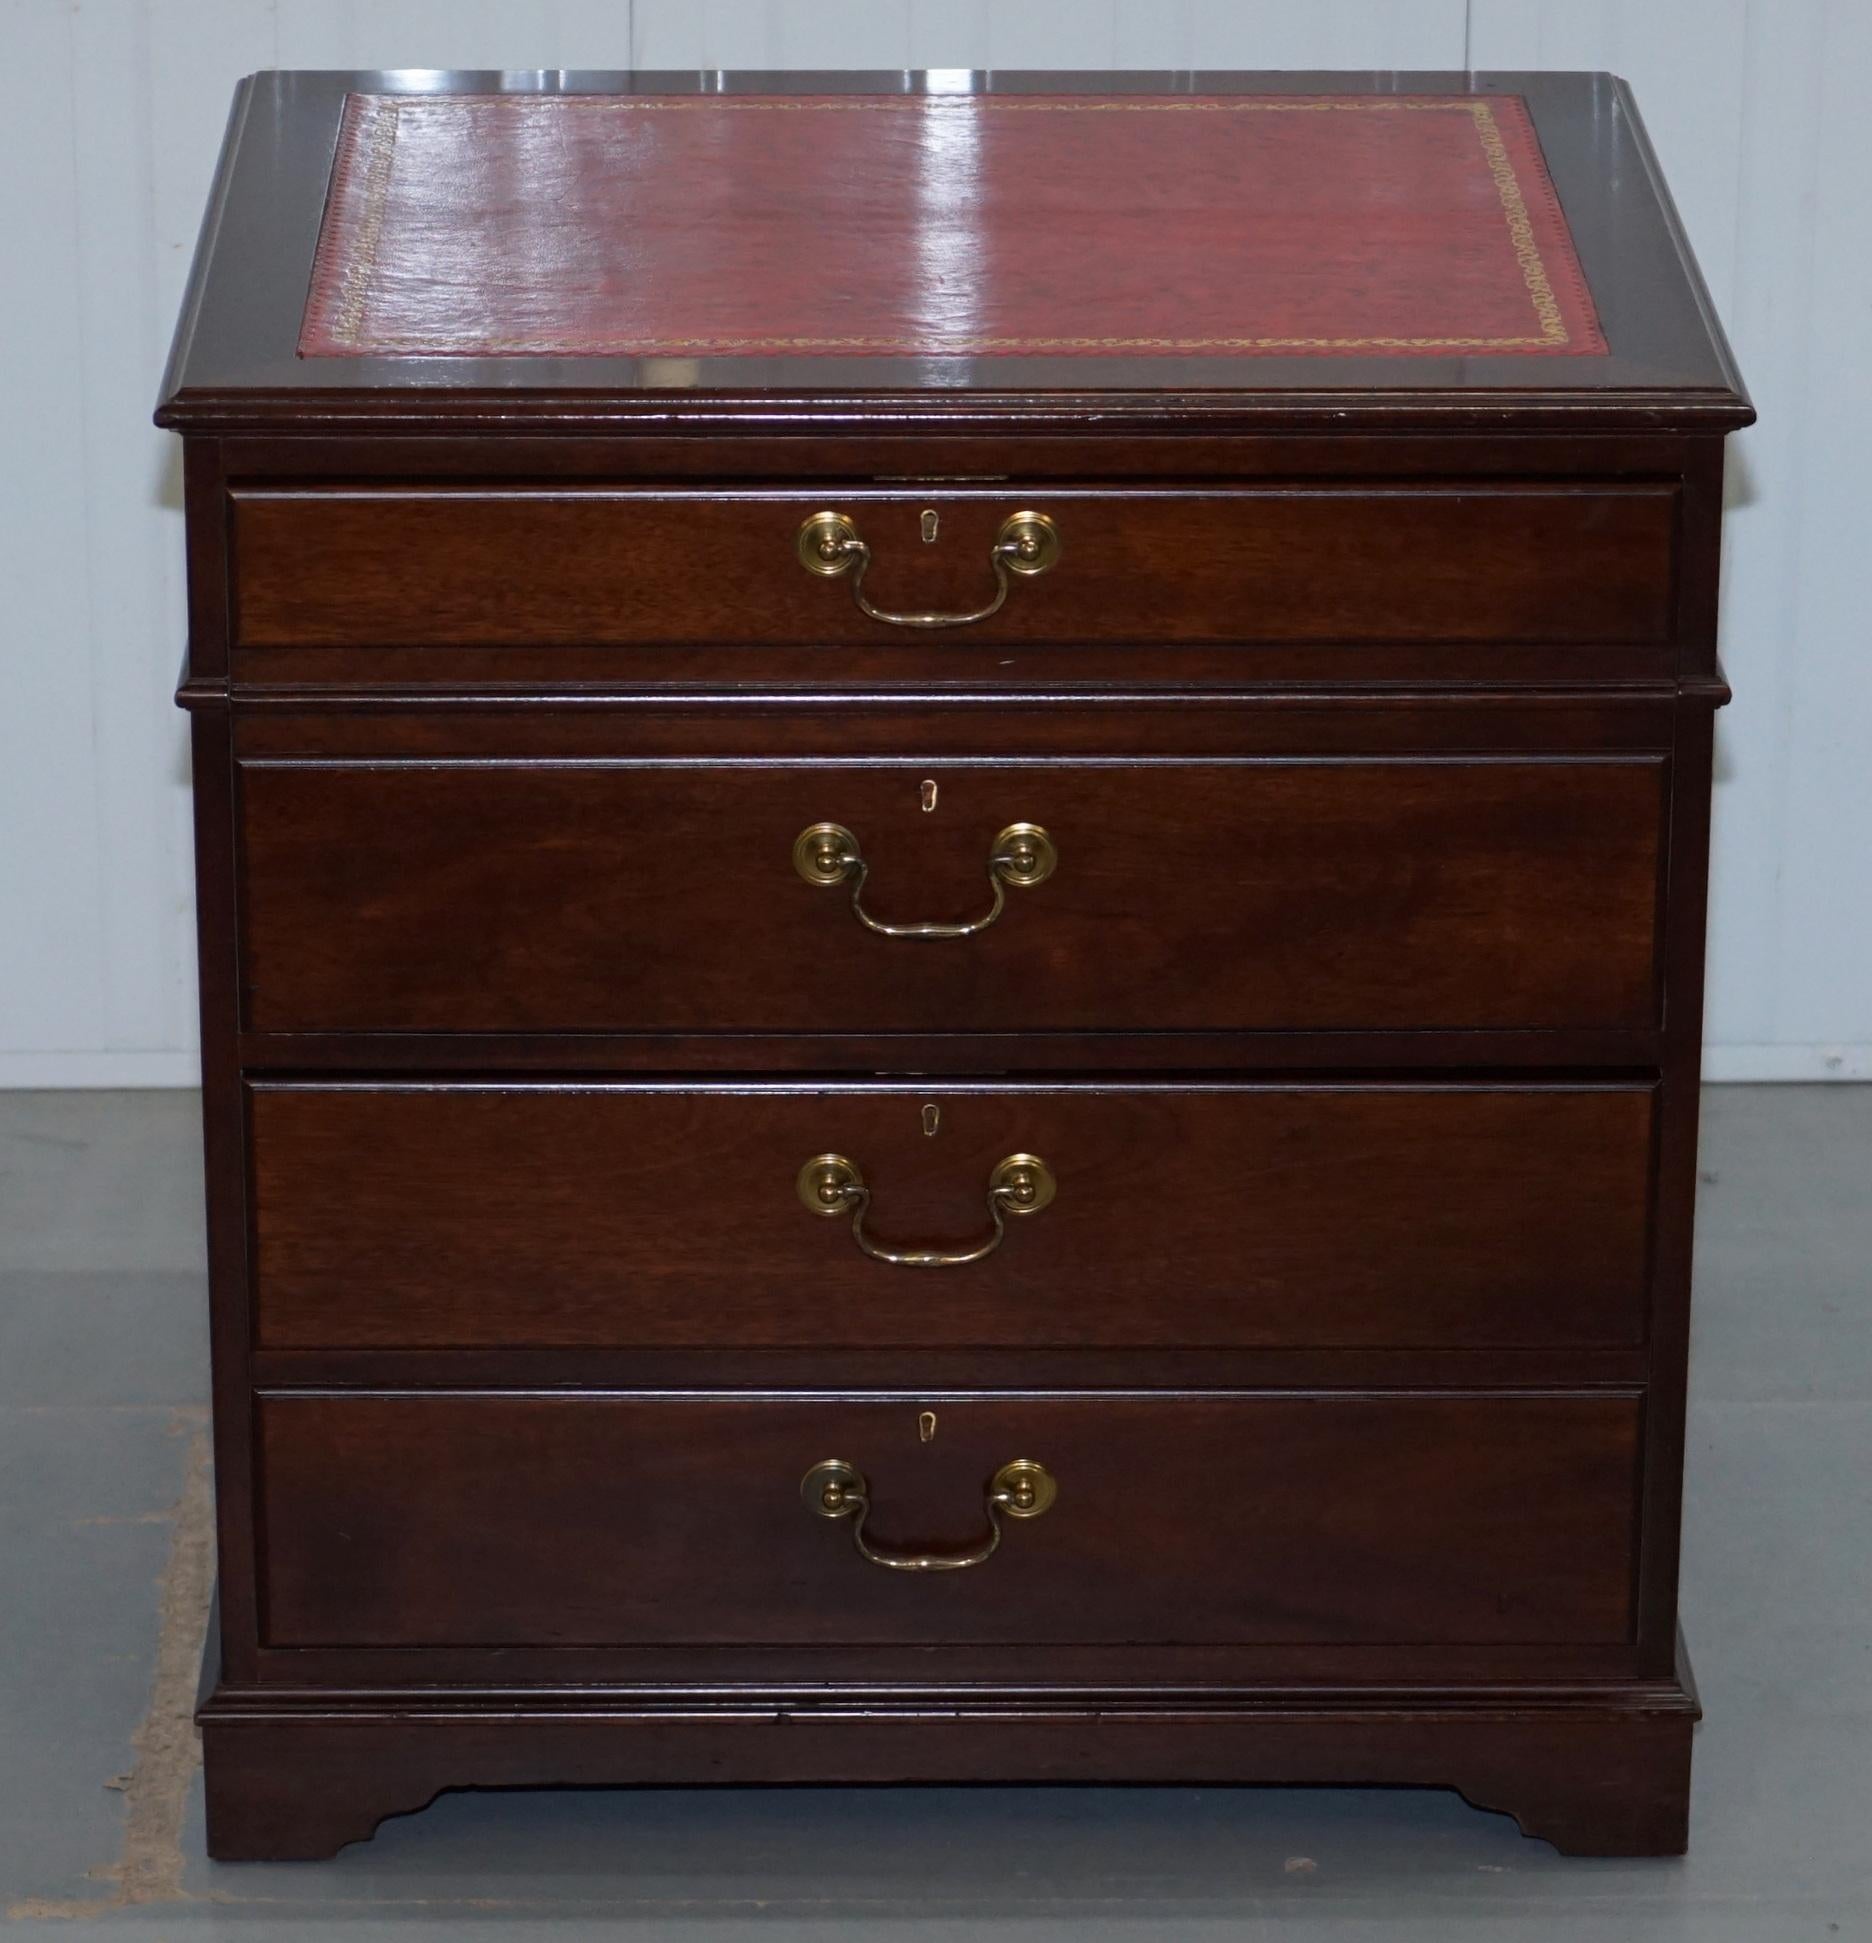 We are delighted to offer for sale this lovely very large Mahogany with oxblood leather writing surface filing cabinet

The oxblood leather writing surface is gold tooled and it has a nice vintage patina to it as does the mahogany frame which is